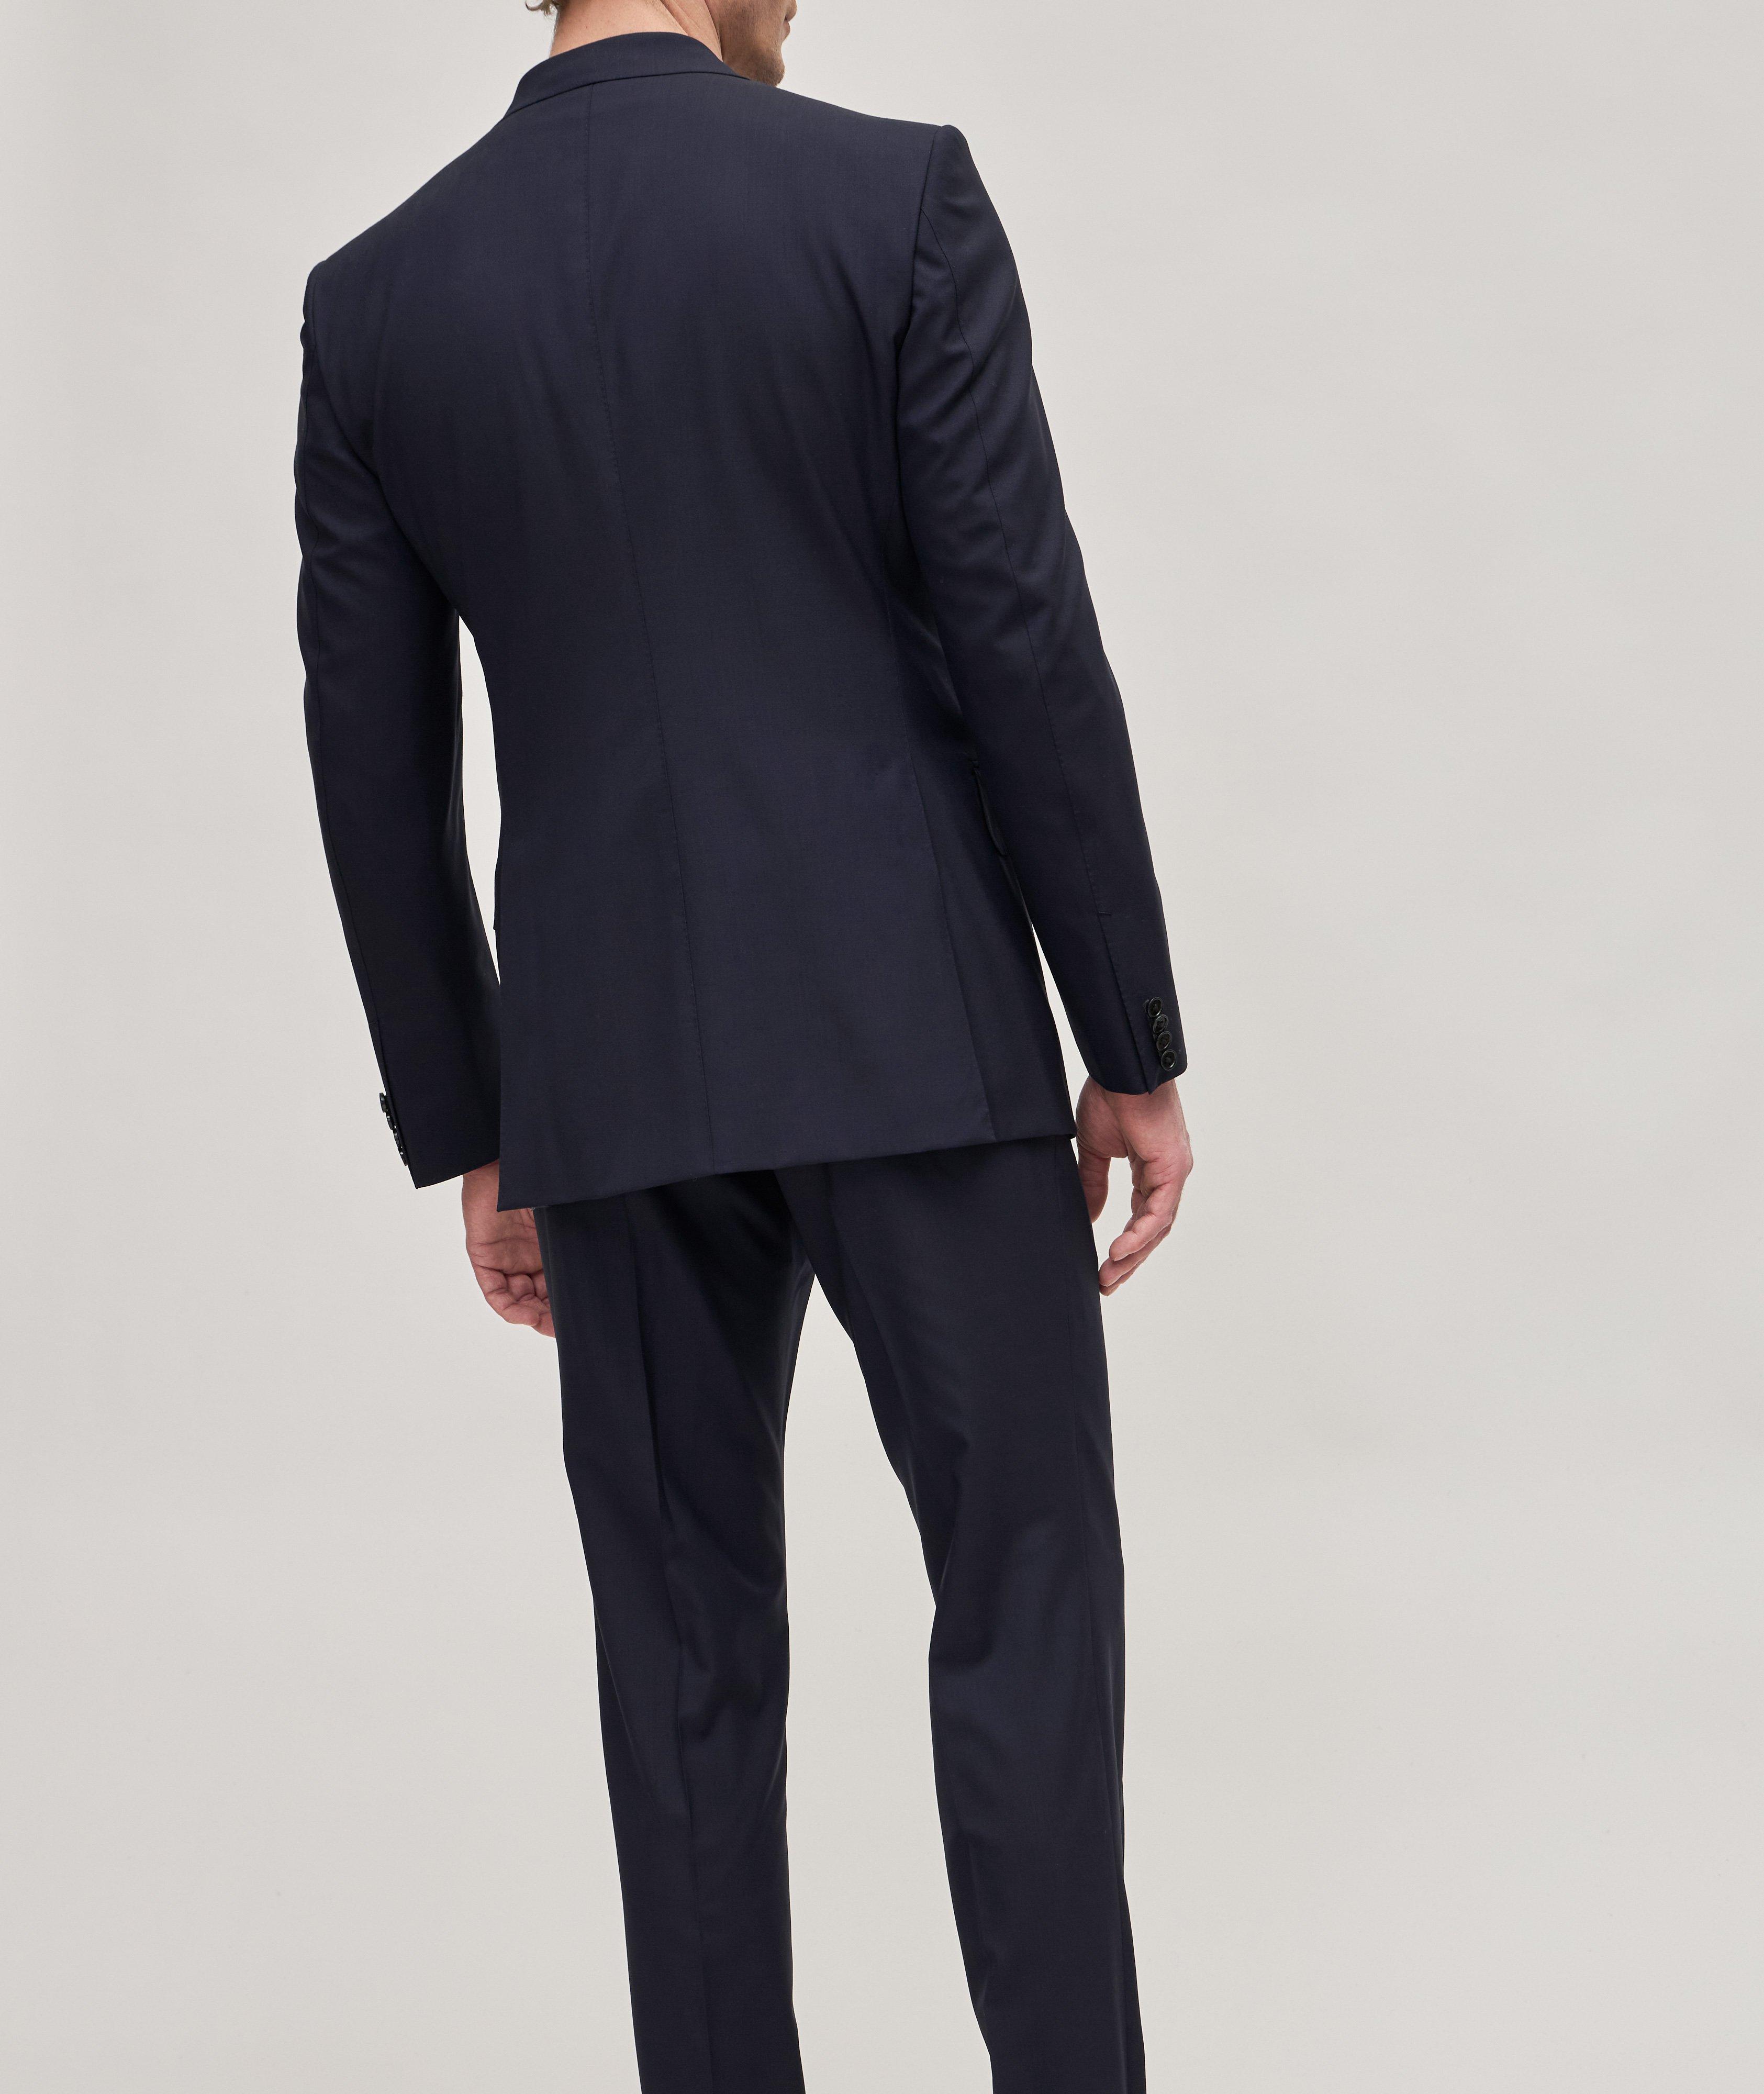 Shelton Solid Wool Suit image 2